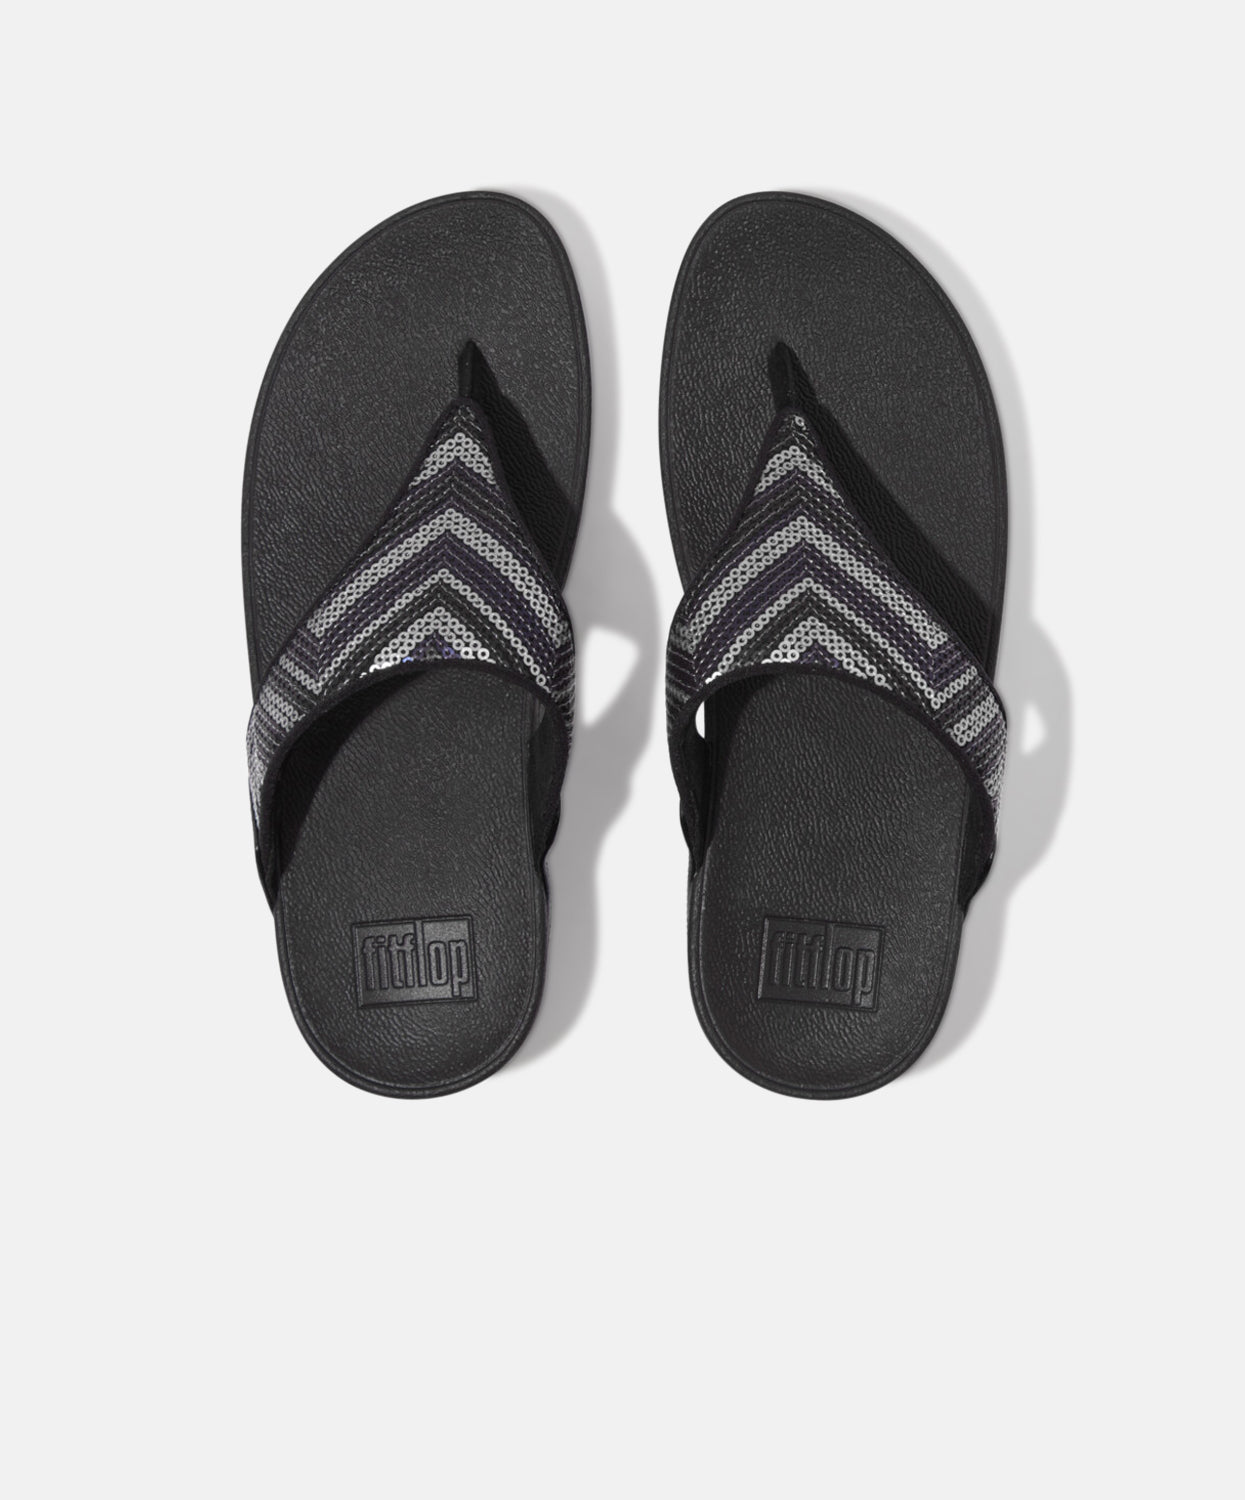 | Lulu $120 Black Free Sandal Shipping – ZigZag Orders Sequin Over Express FitFlop Bstore Toe-post